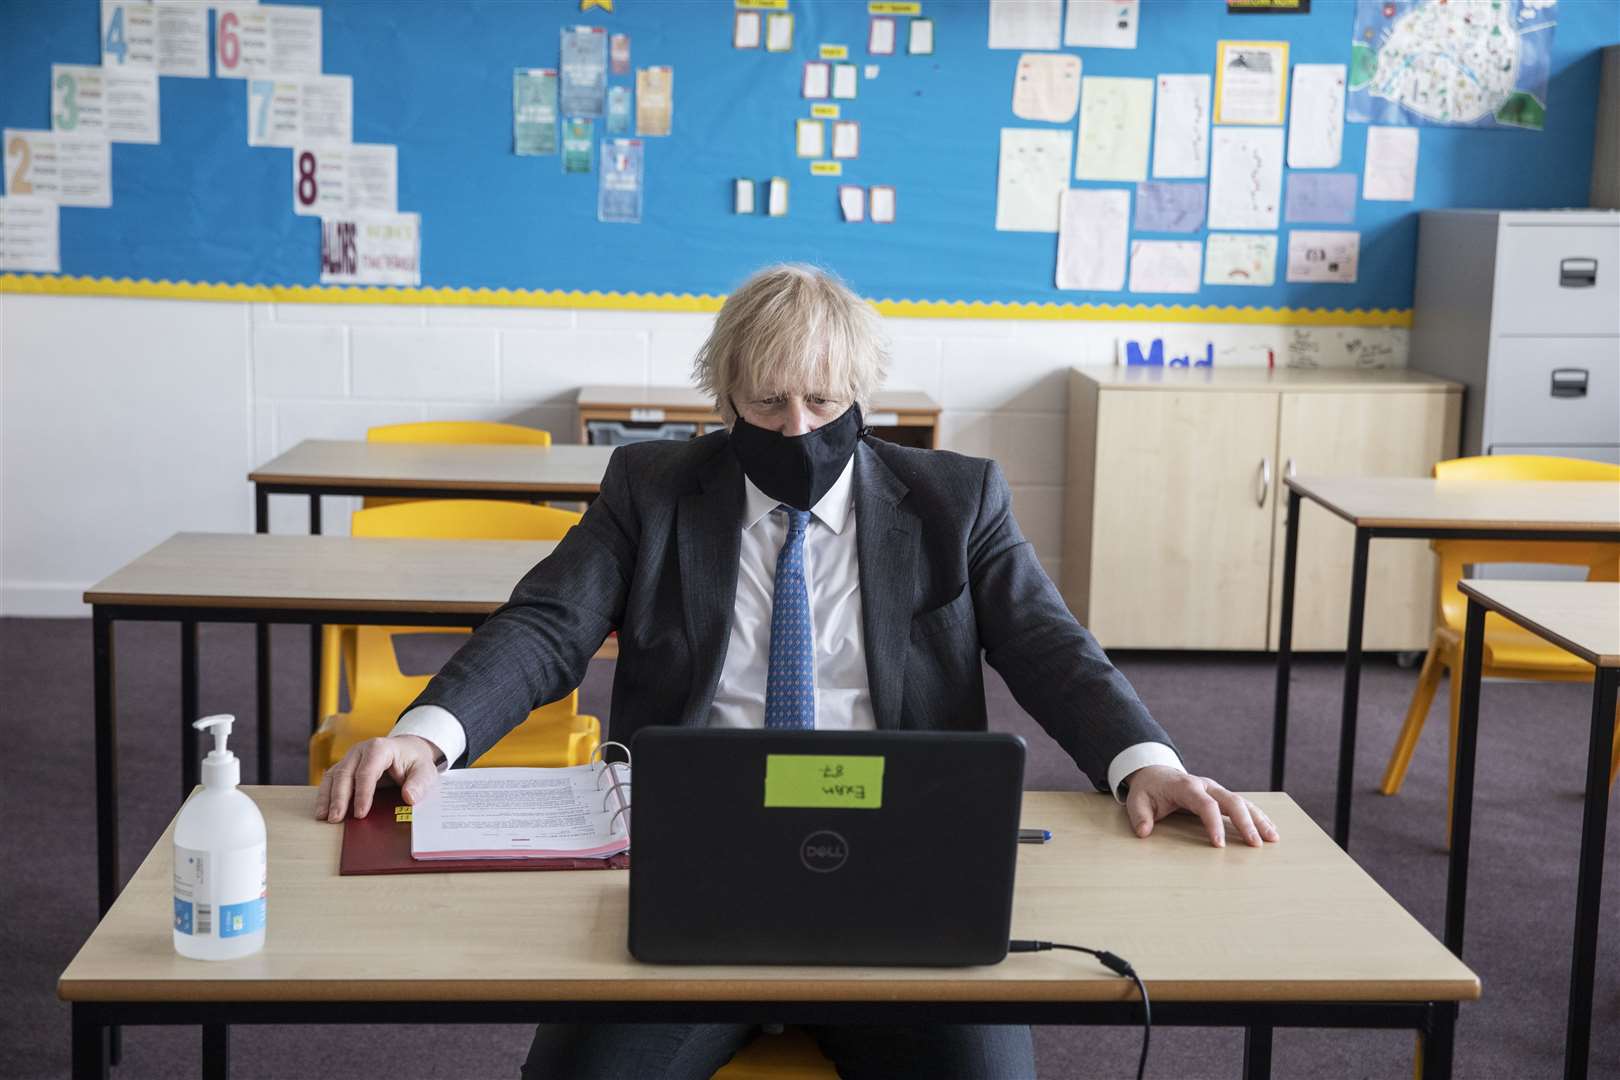 Prime Minister Boris Johnson takes part in an online class during a visit to Sedgehill School in Lewisham, south-east London (Jack Hill/The Times/PA)